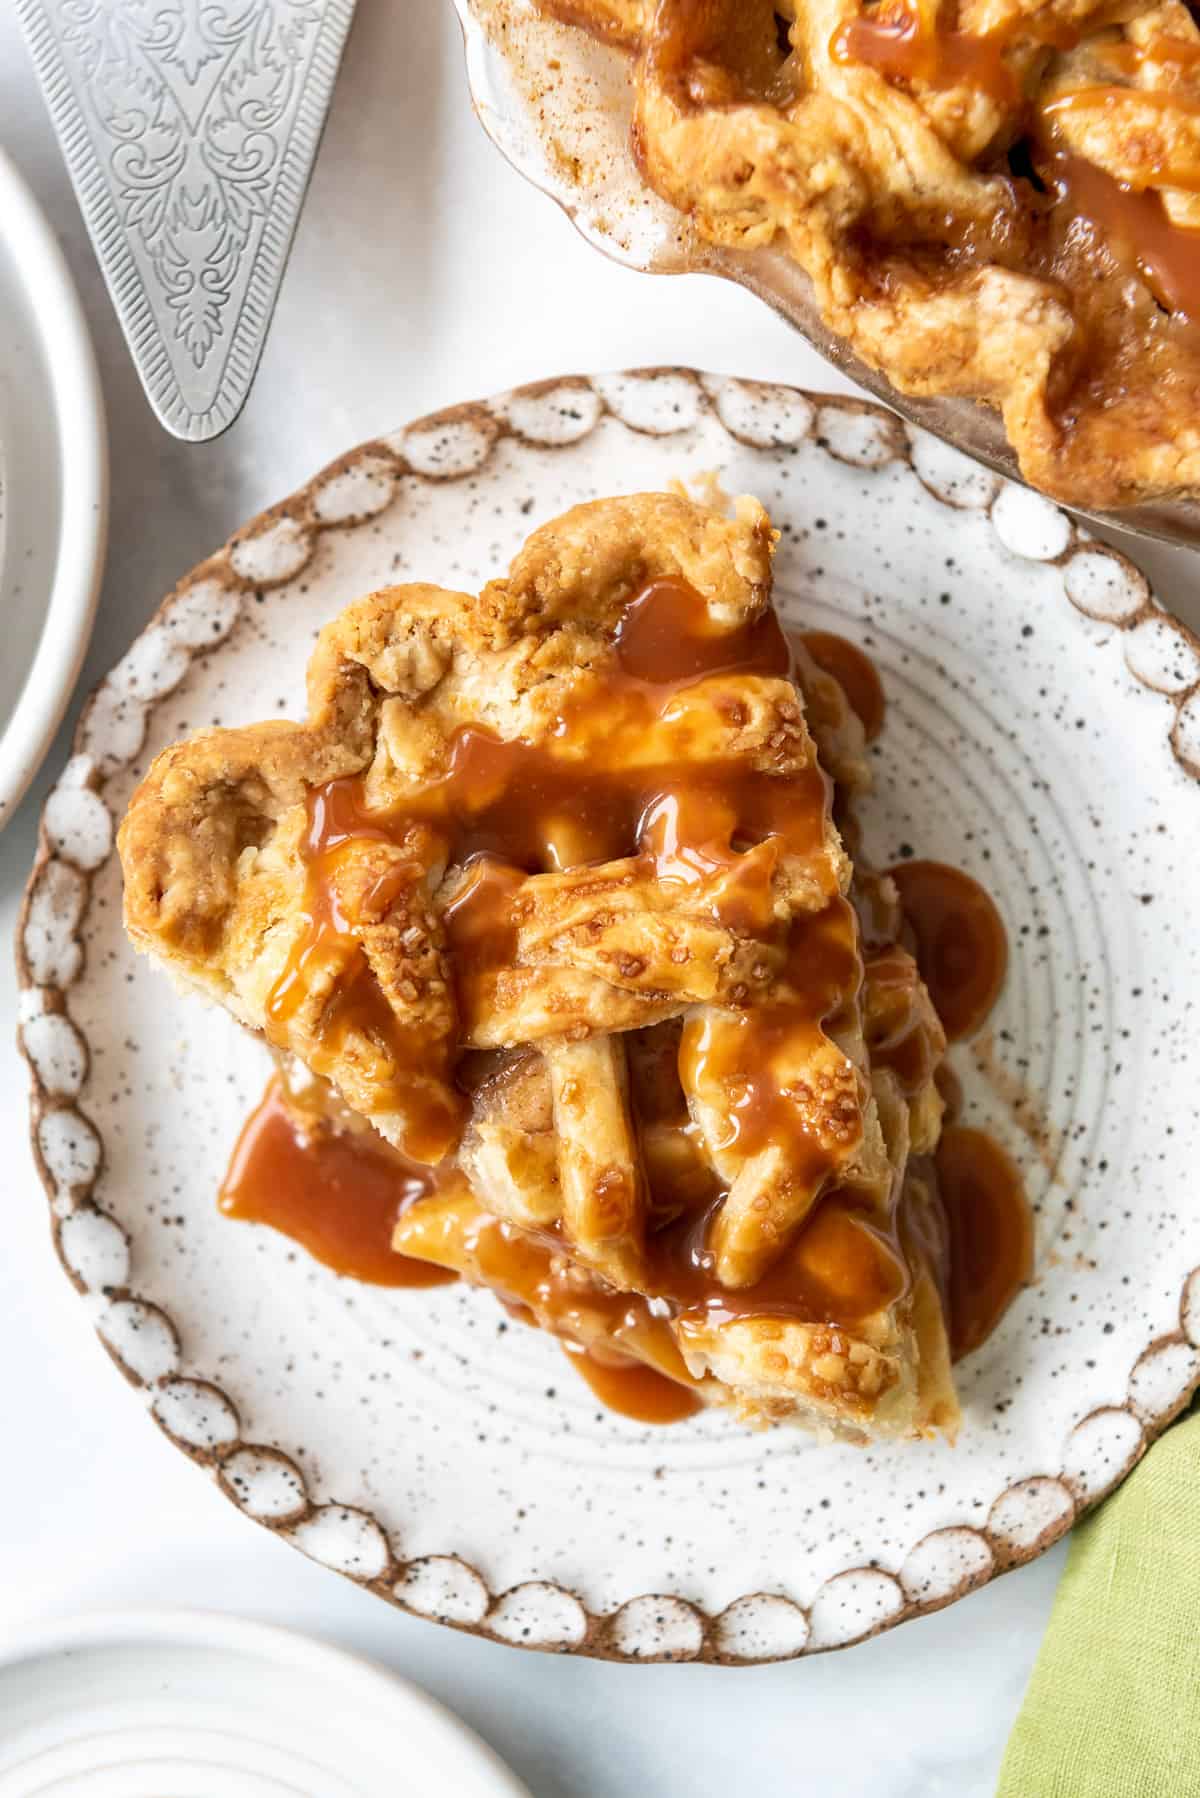 A slice of apple pie with caramel drizzled on top.